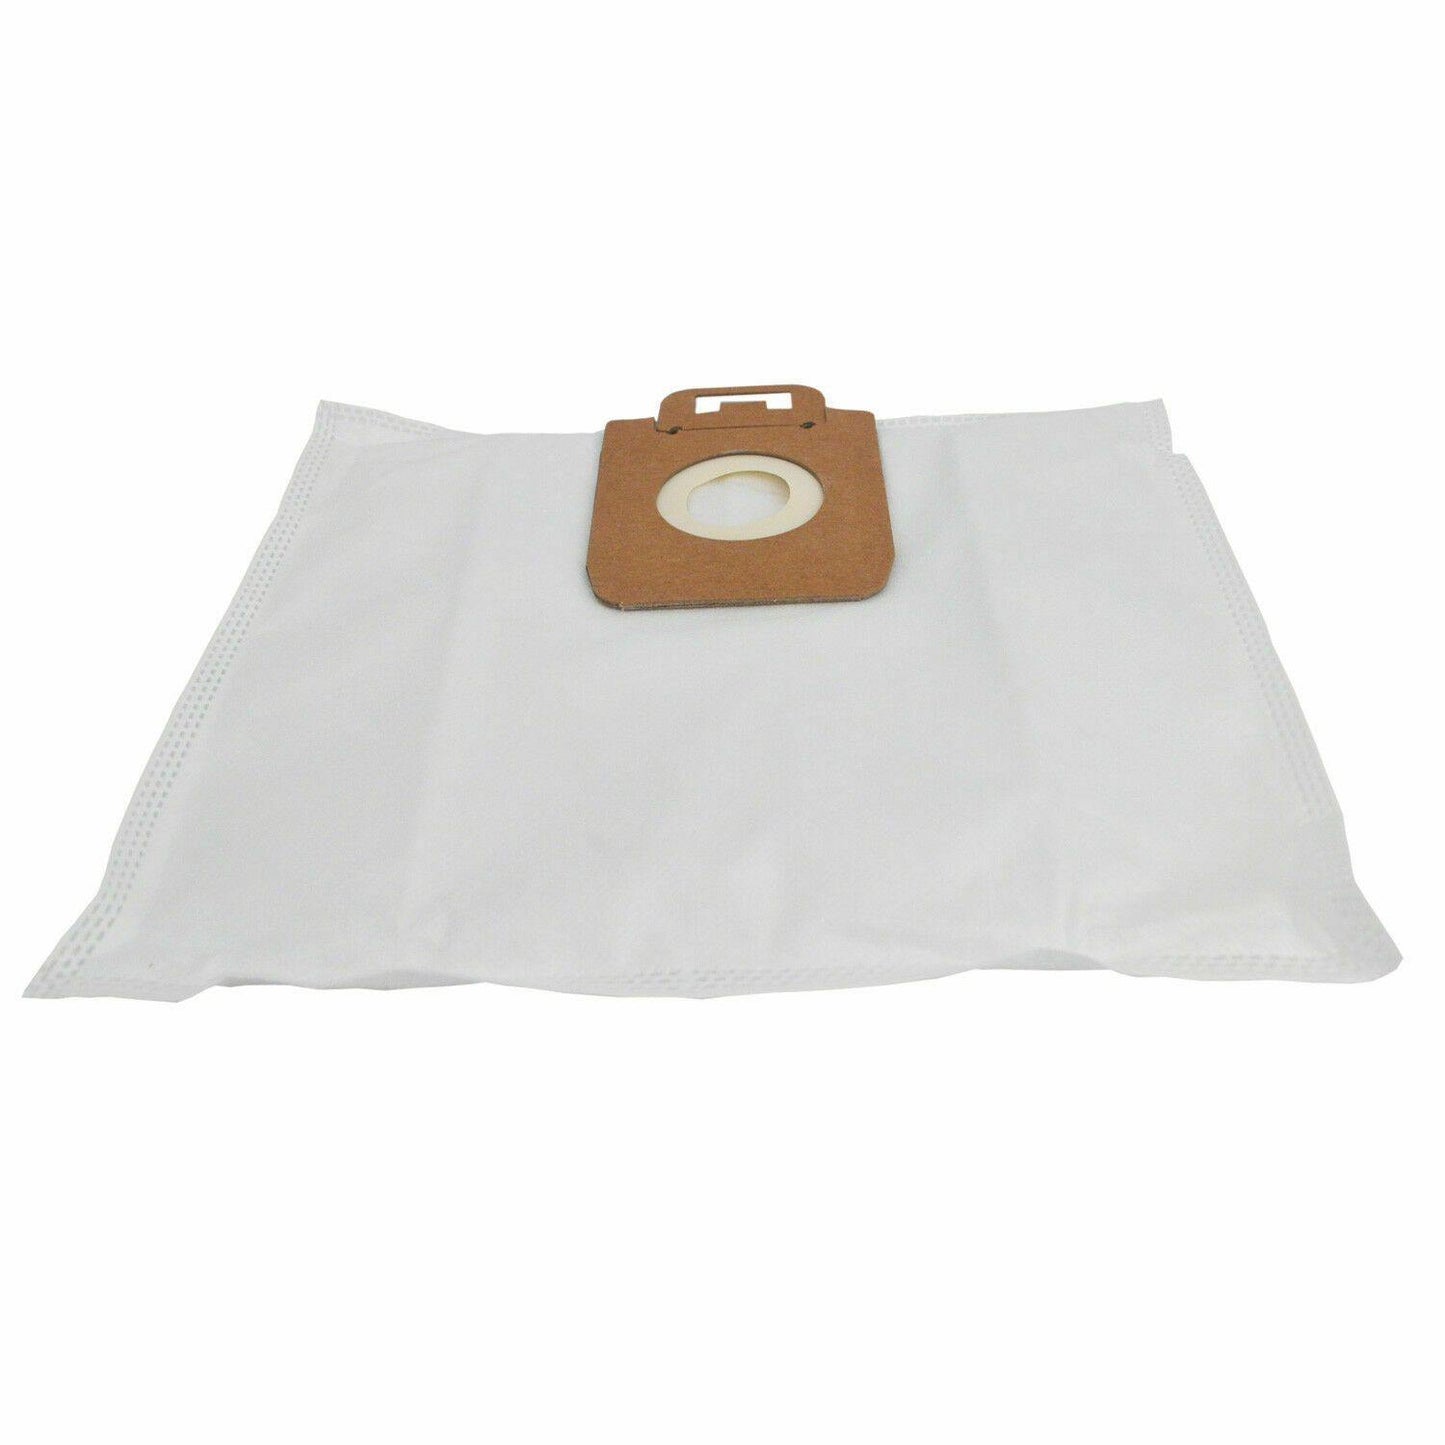 12X Synthetic Dust Bags For Nilfisk Power Special Power Cleaner Power Allergy Sparesbarn